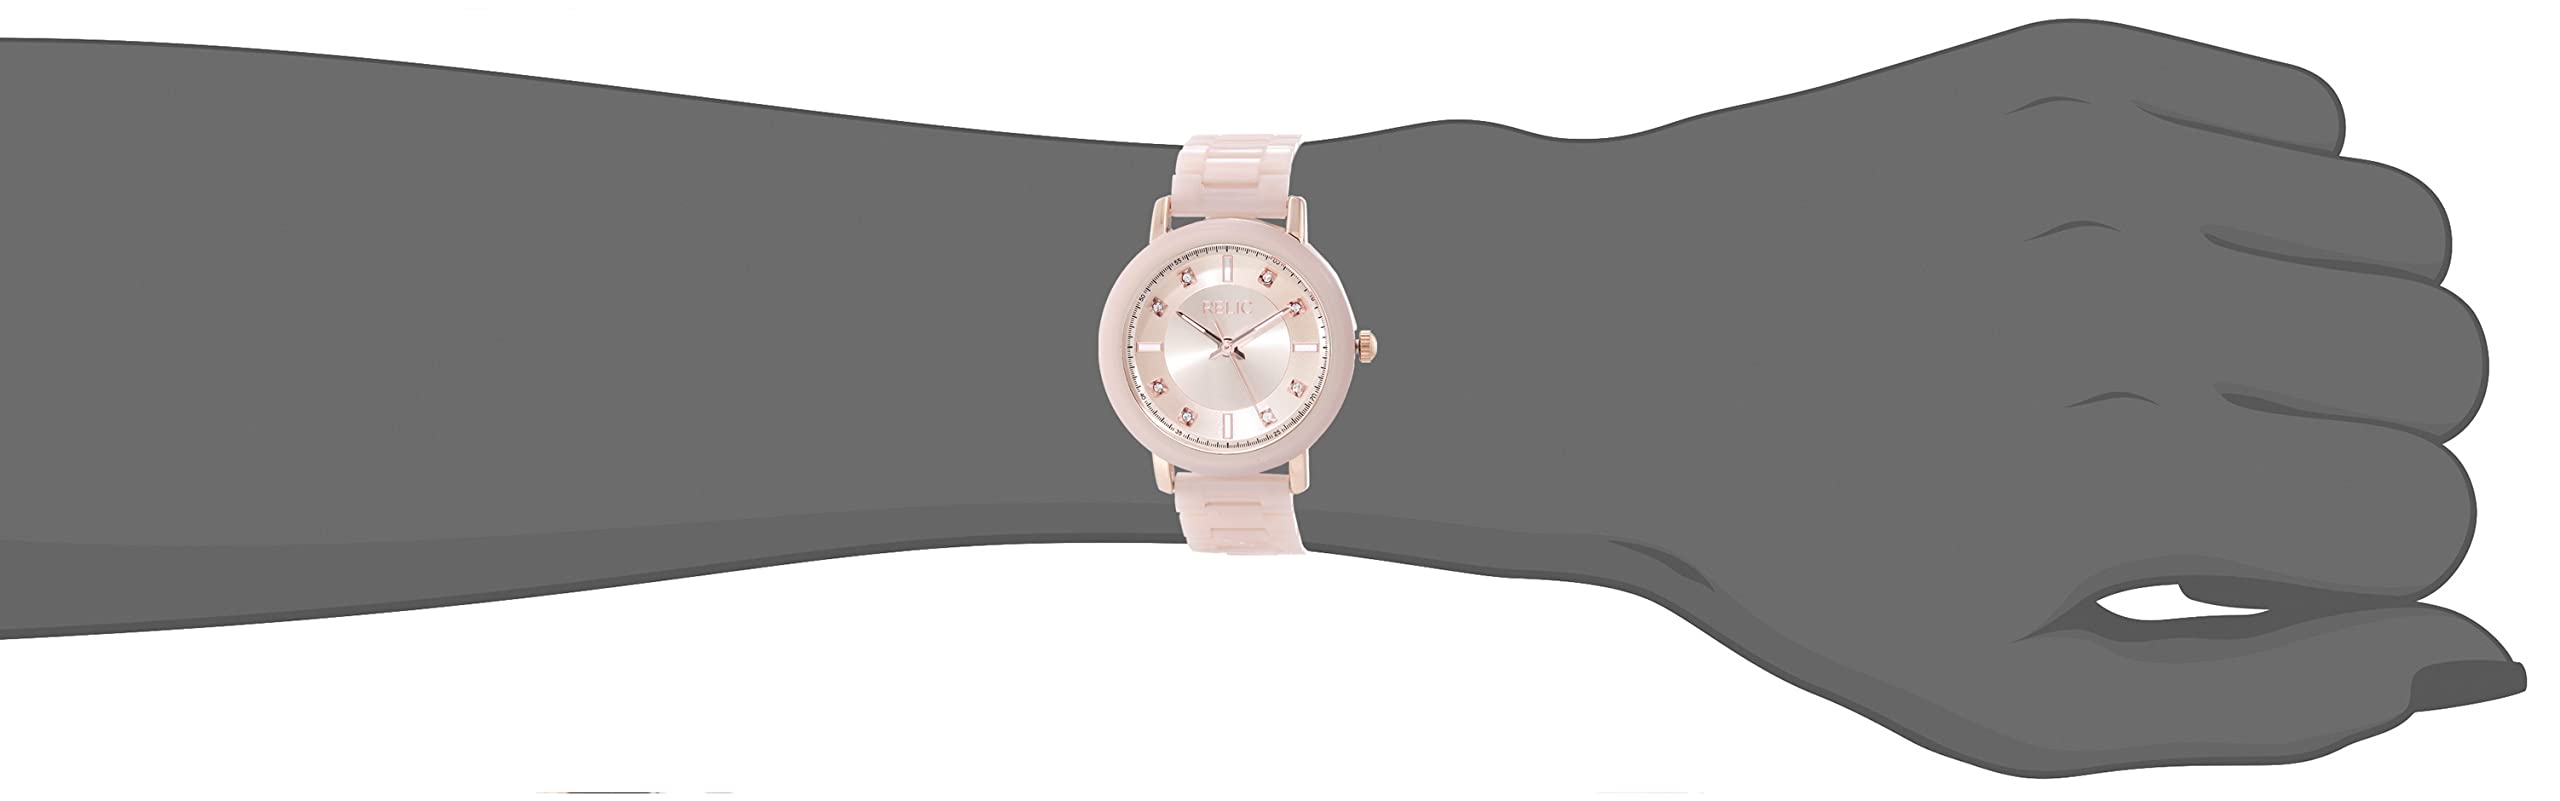 Relic by Fossil Dress Watch with Stainless Steel Strap